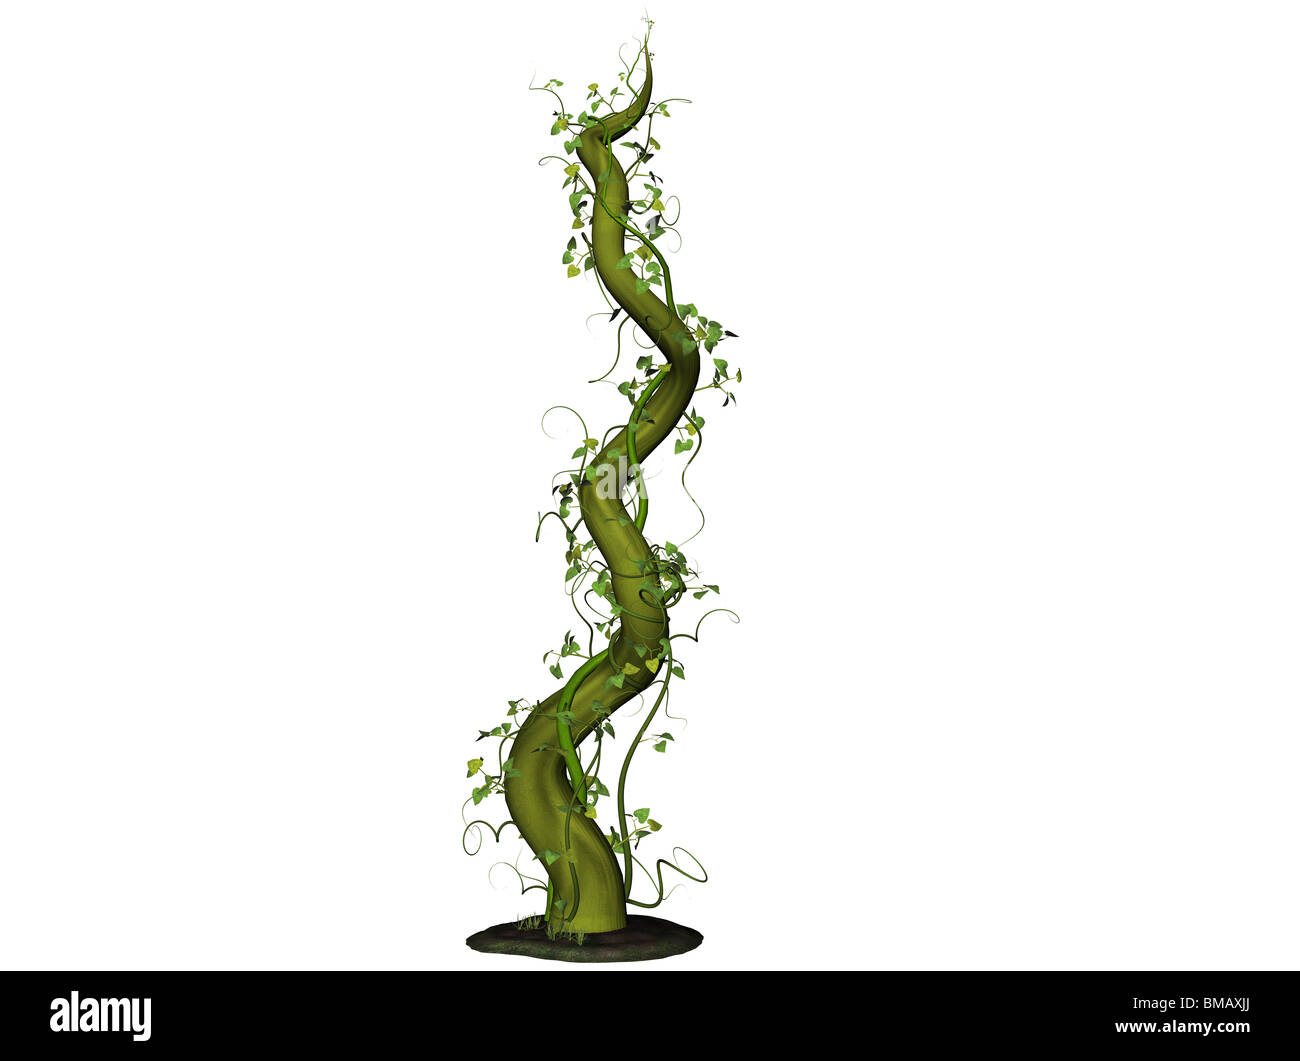 Isolated 3D Illustration of a bean stalk Stock Photo